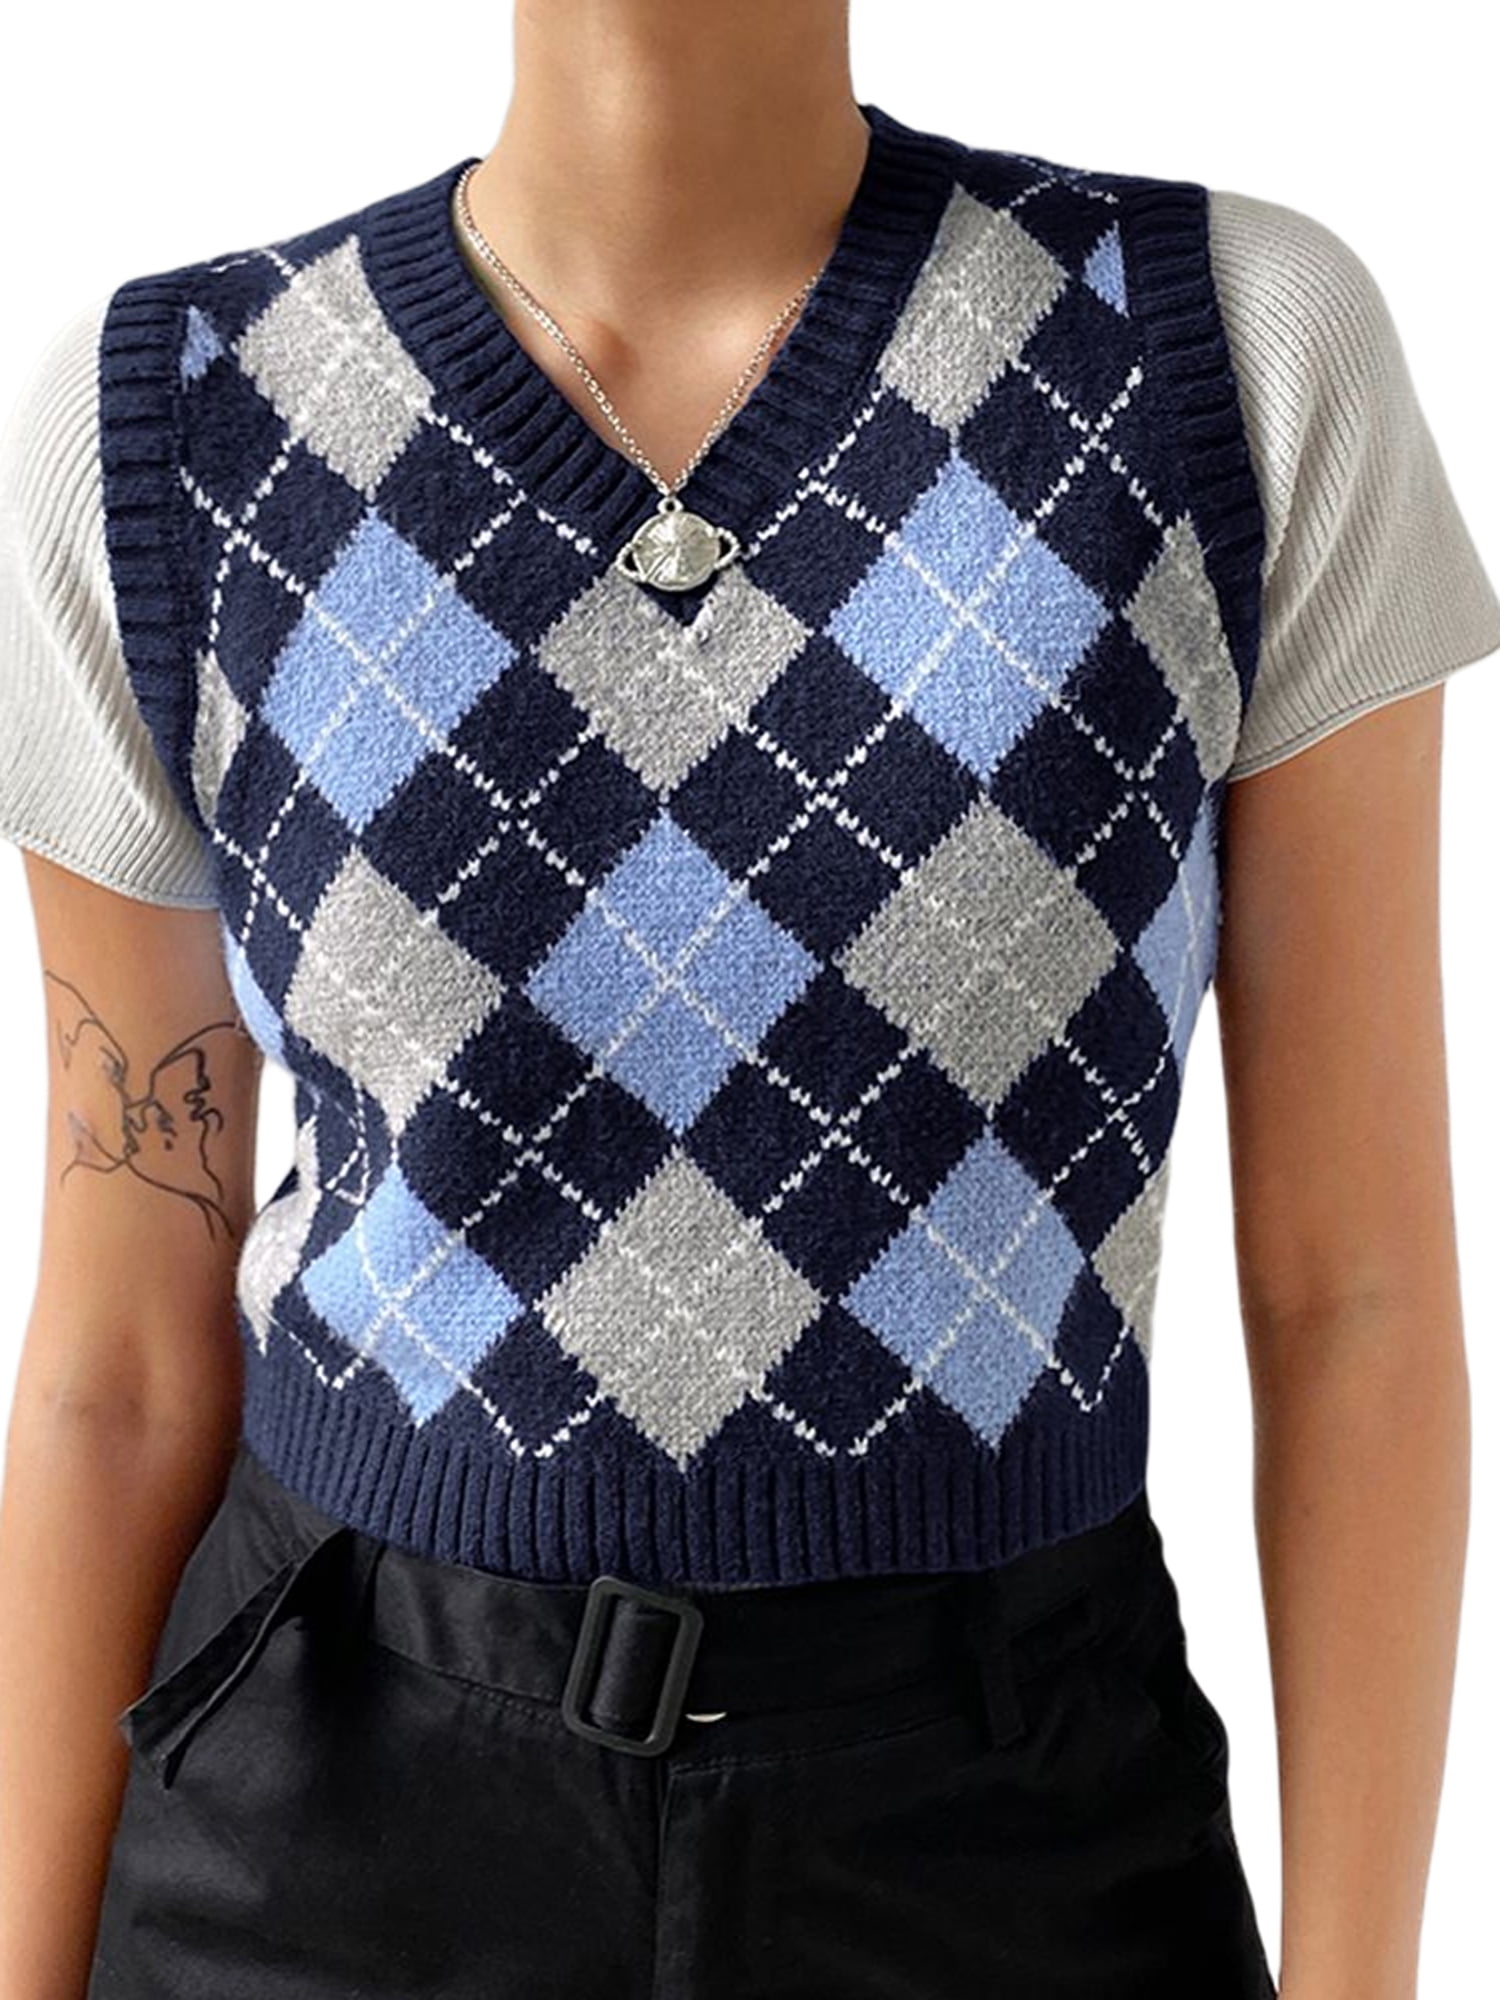 Woman Short Sleeveless Knitted Sweater Vest Side Buttons Casual Vest Female Pullover Autumn Top